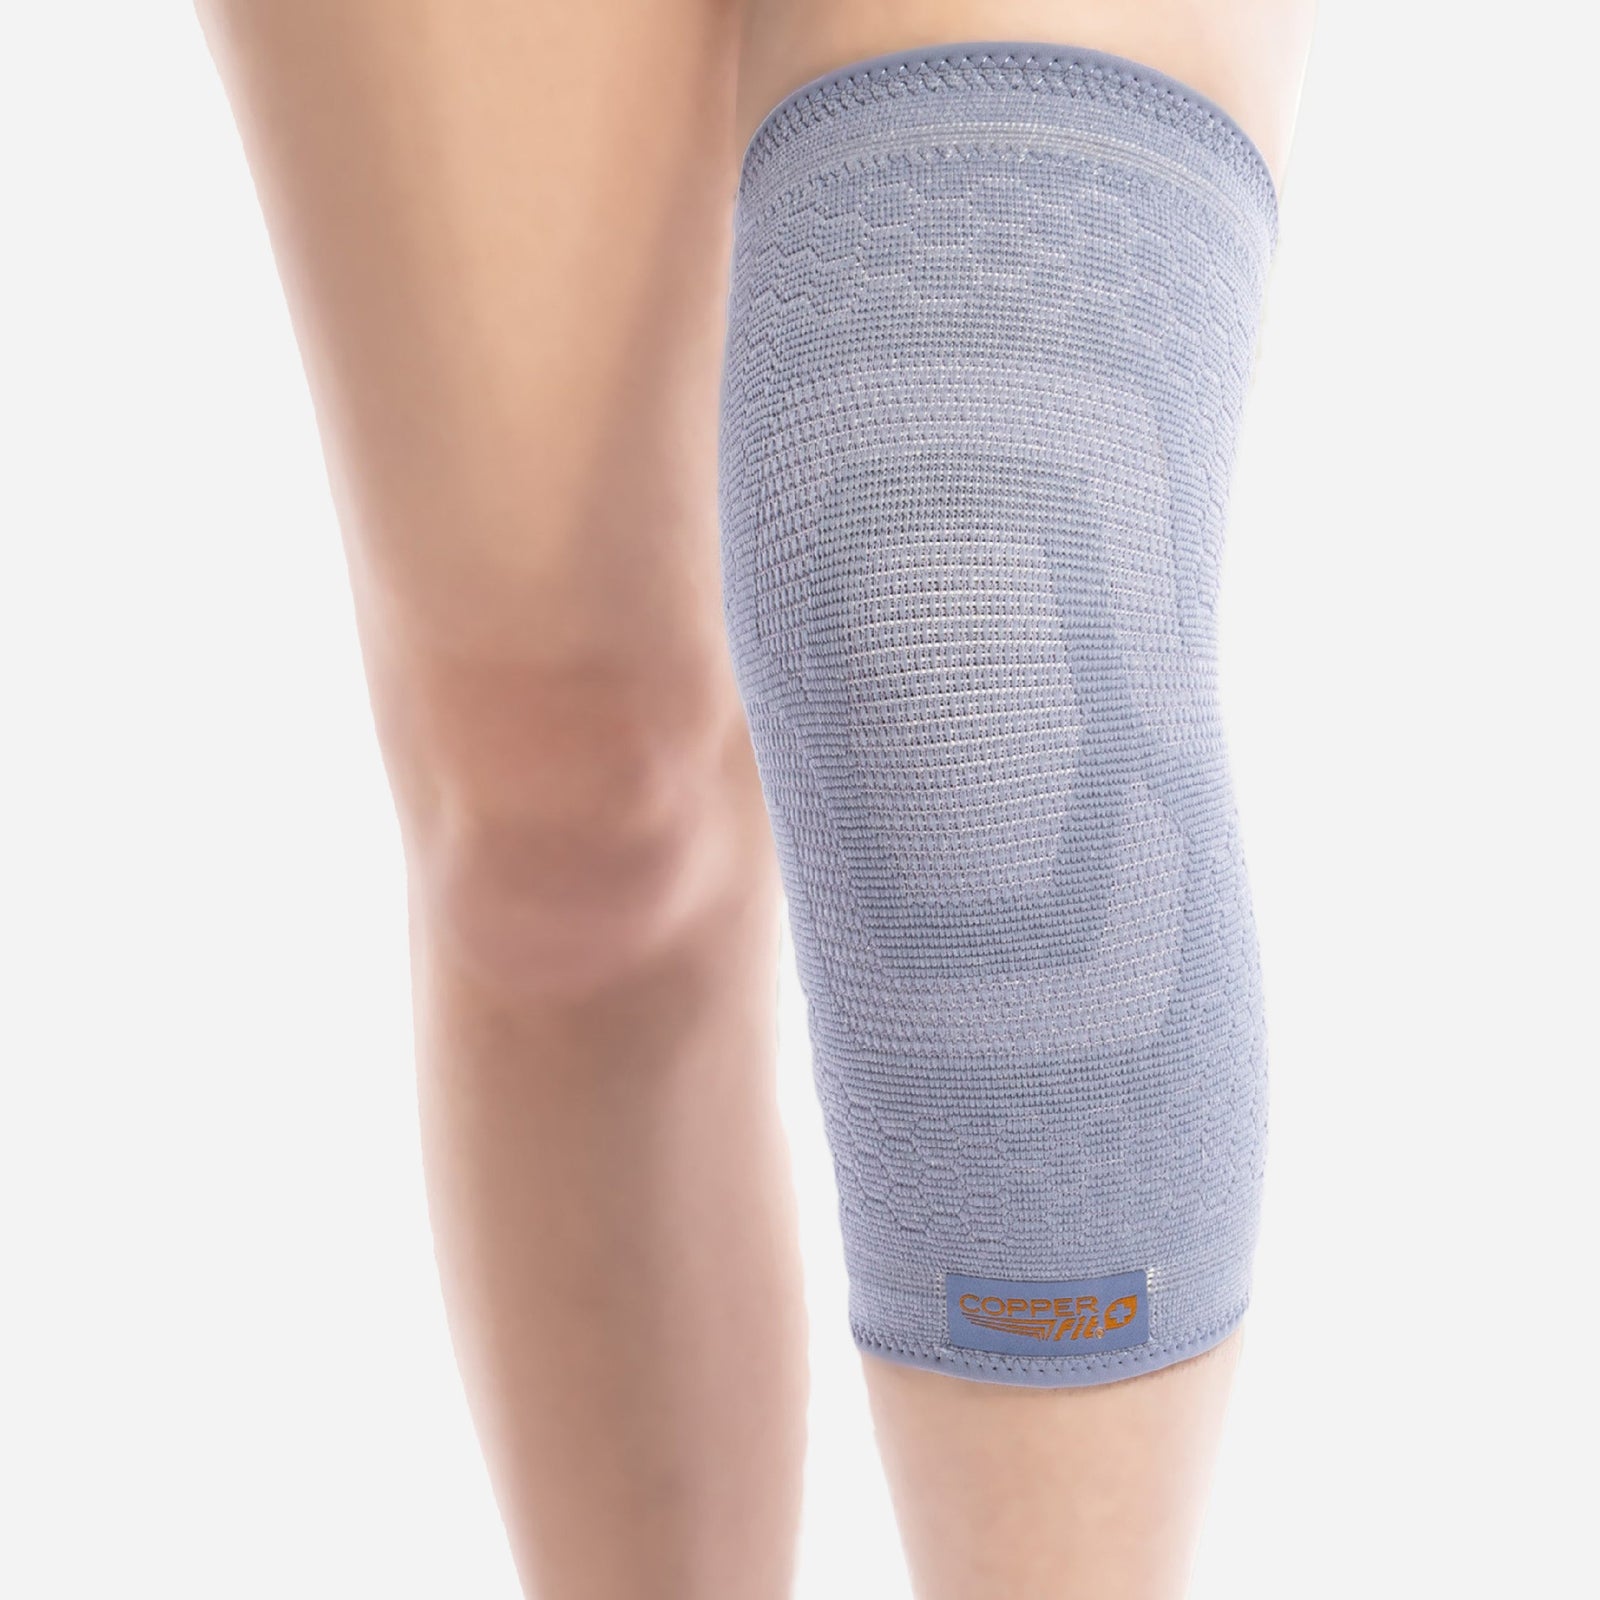 Knee Brace for Arthritis Pain and Support-Copper knee sleeve Compressi –  TLCdepot